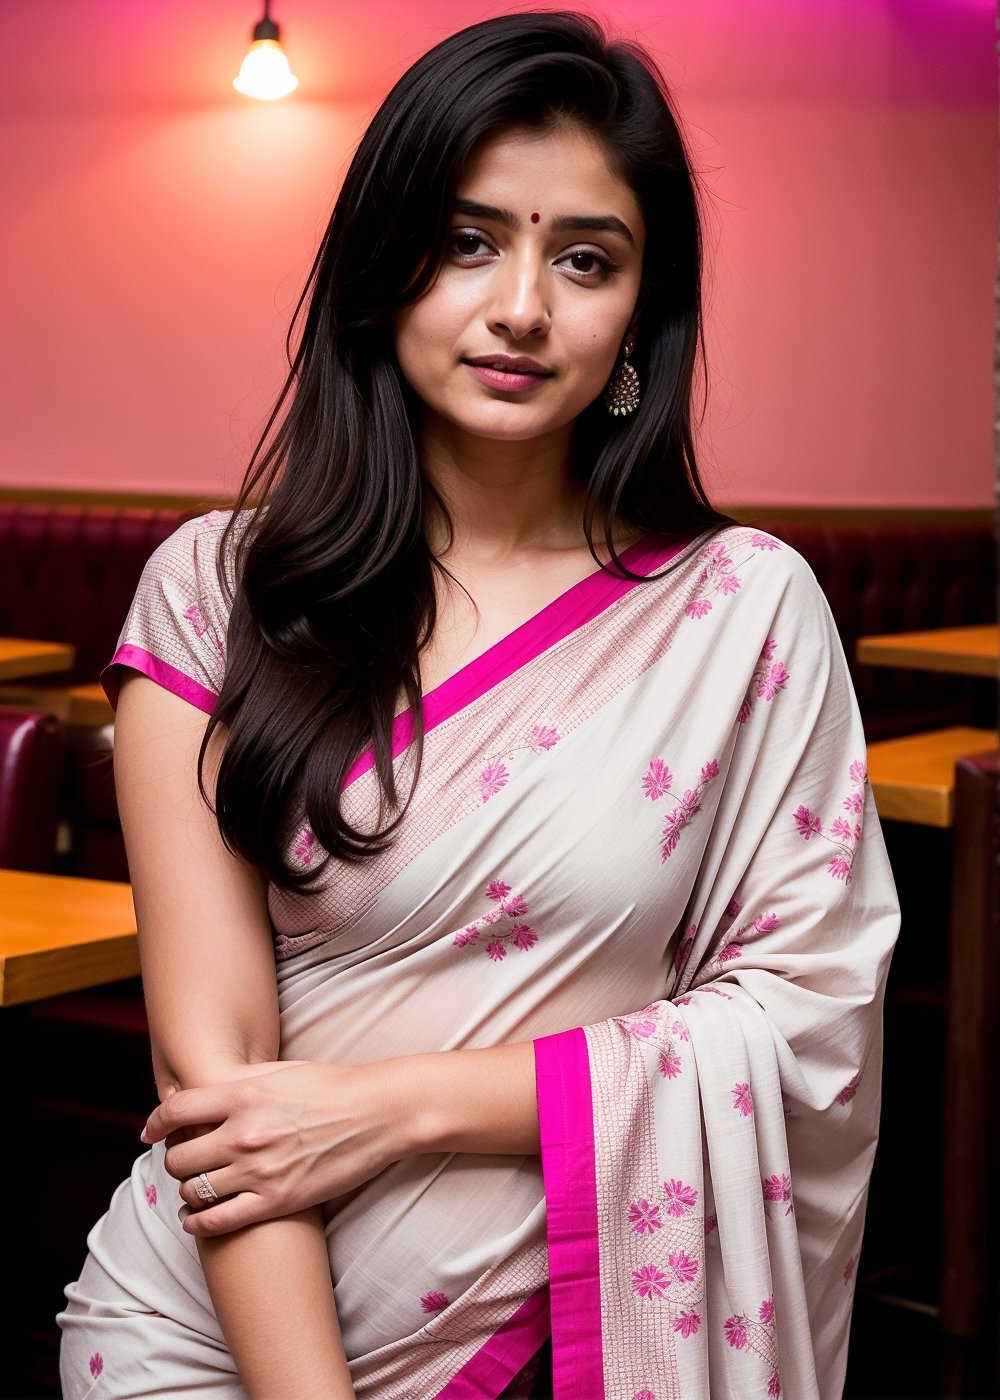 Lovely cute hot Alia Bhatt, acute an Instagram model 22 years old, full-length, long blonde_hair, black hair, They are wearing a Pink Floral Woven Design Saree. The background cafe drinking water. indian cafe